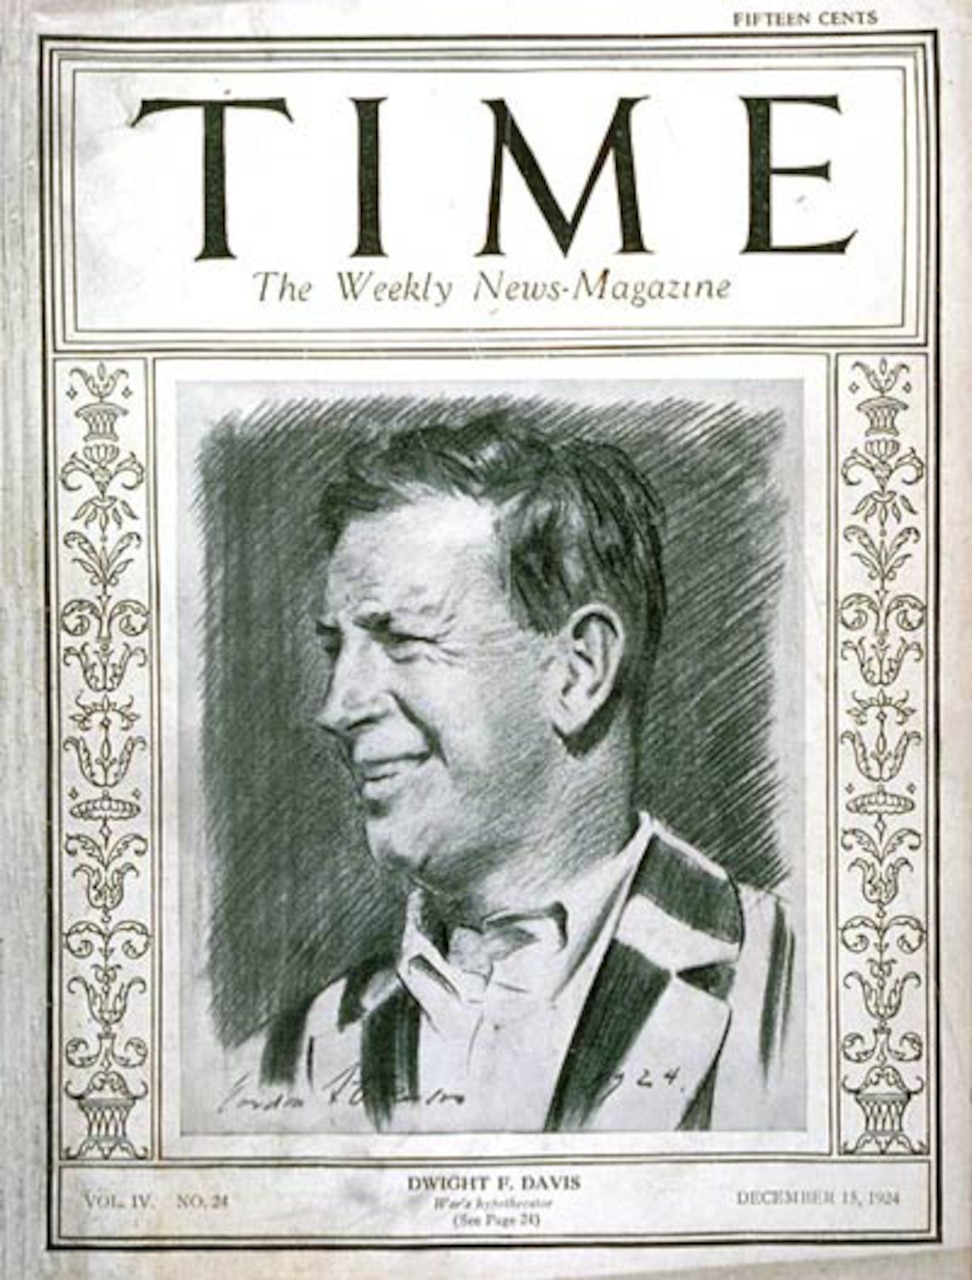 A man poses on the cover of Time magazine.